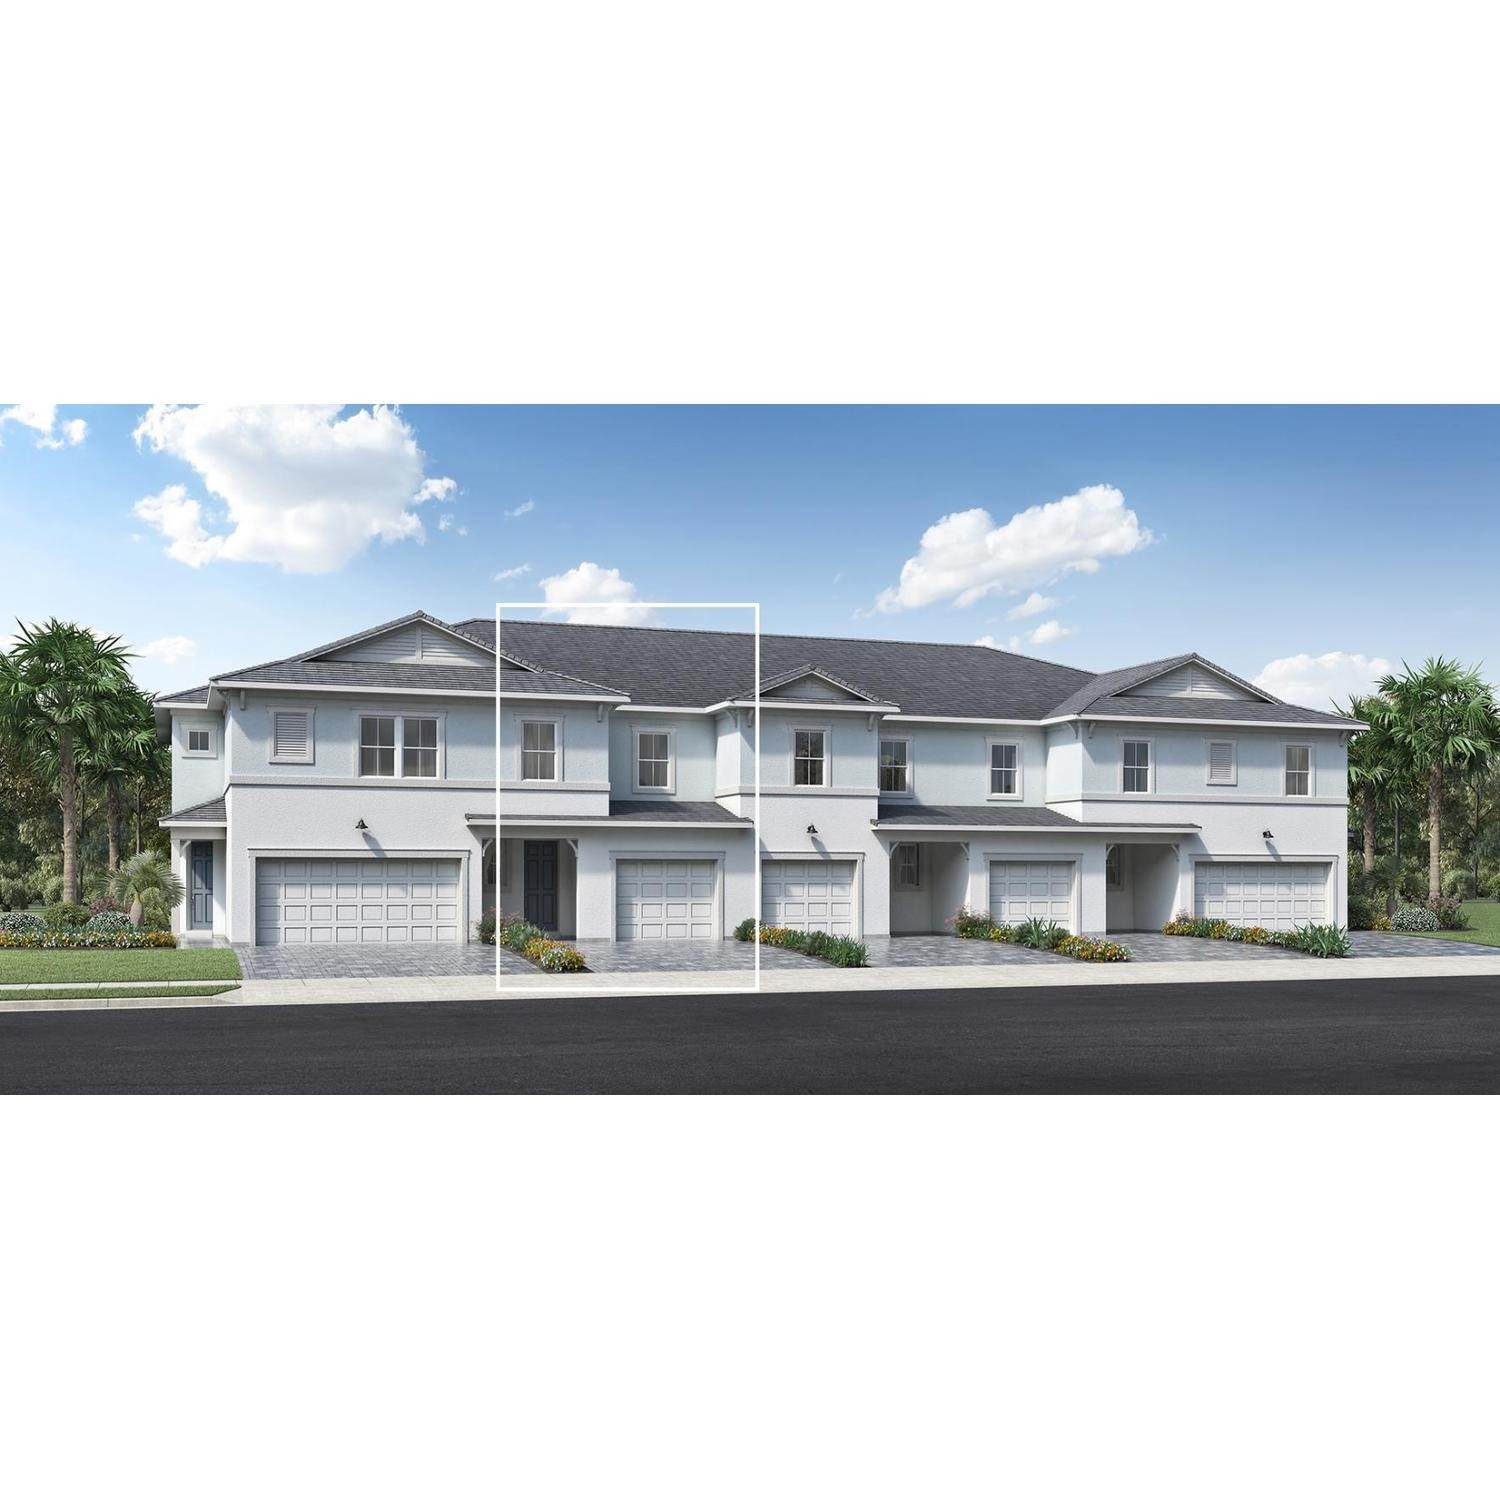 Multi Family for Sale at Sandpiper Pointe At Deerfield Beach - Coquina 1830 Sandpiper Pointe Pl DEERFIELD BEACH, FLORIDA 33442 UNITED STATES